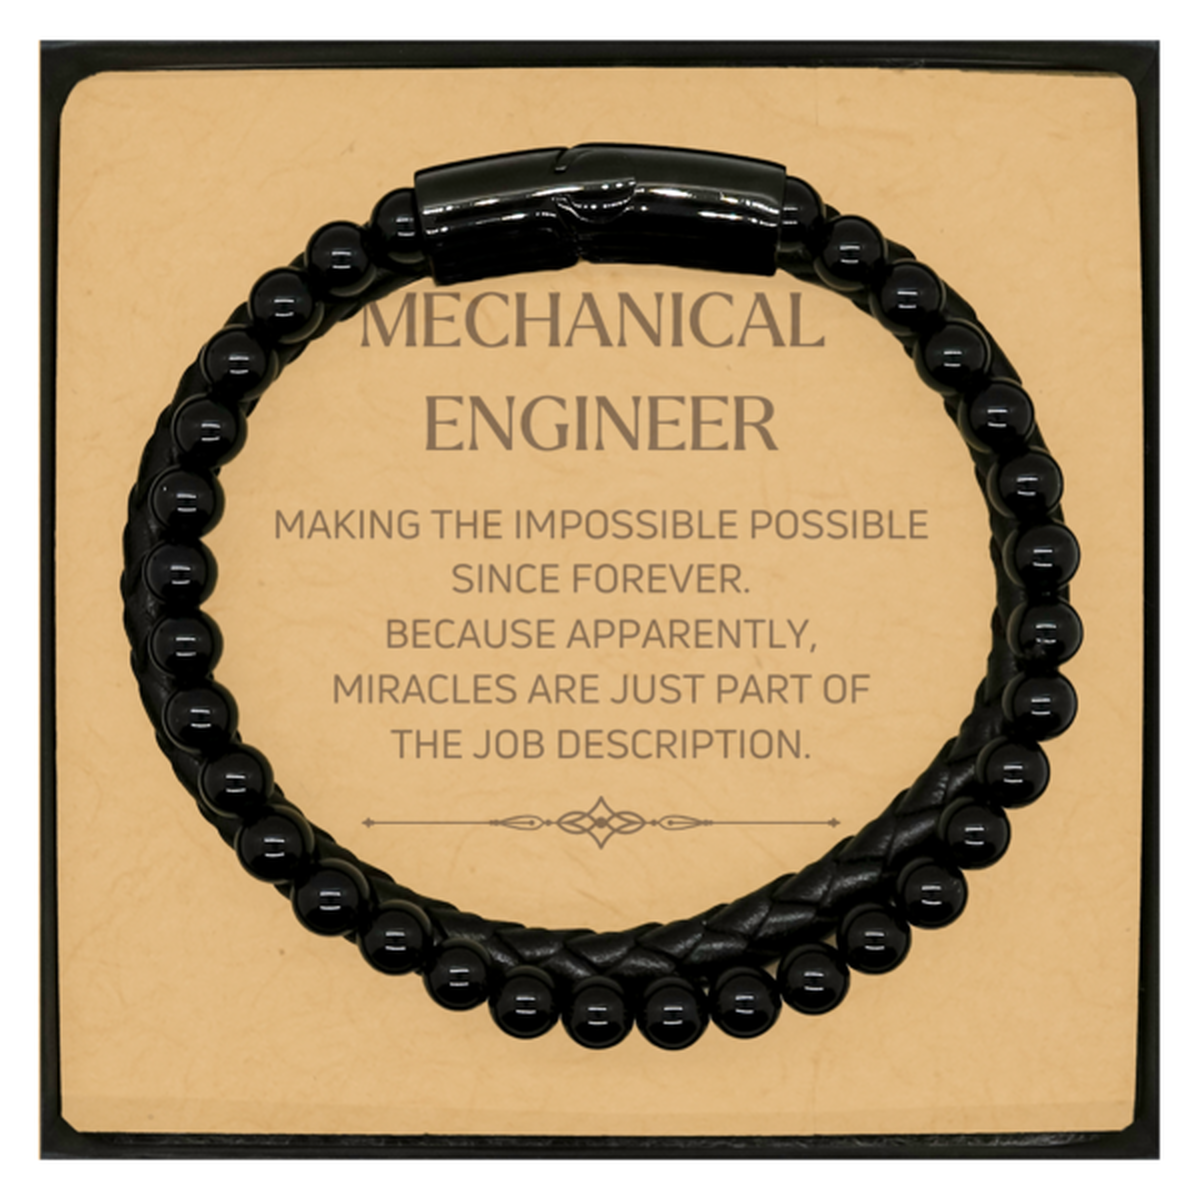 Funny Mechanical Engineer Gifts, Miracles are just part of the job description, Inspirational Birthday Christmas Stone Leather Bracelets For Mechanical Engineer, Men, Women, Coworkers, Friends, Boss